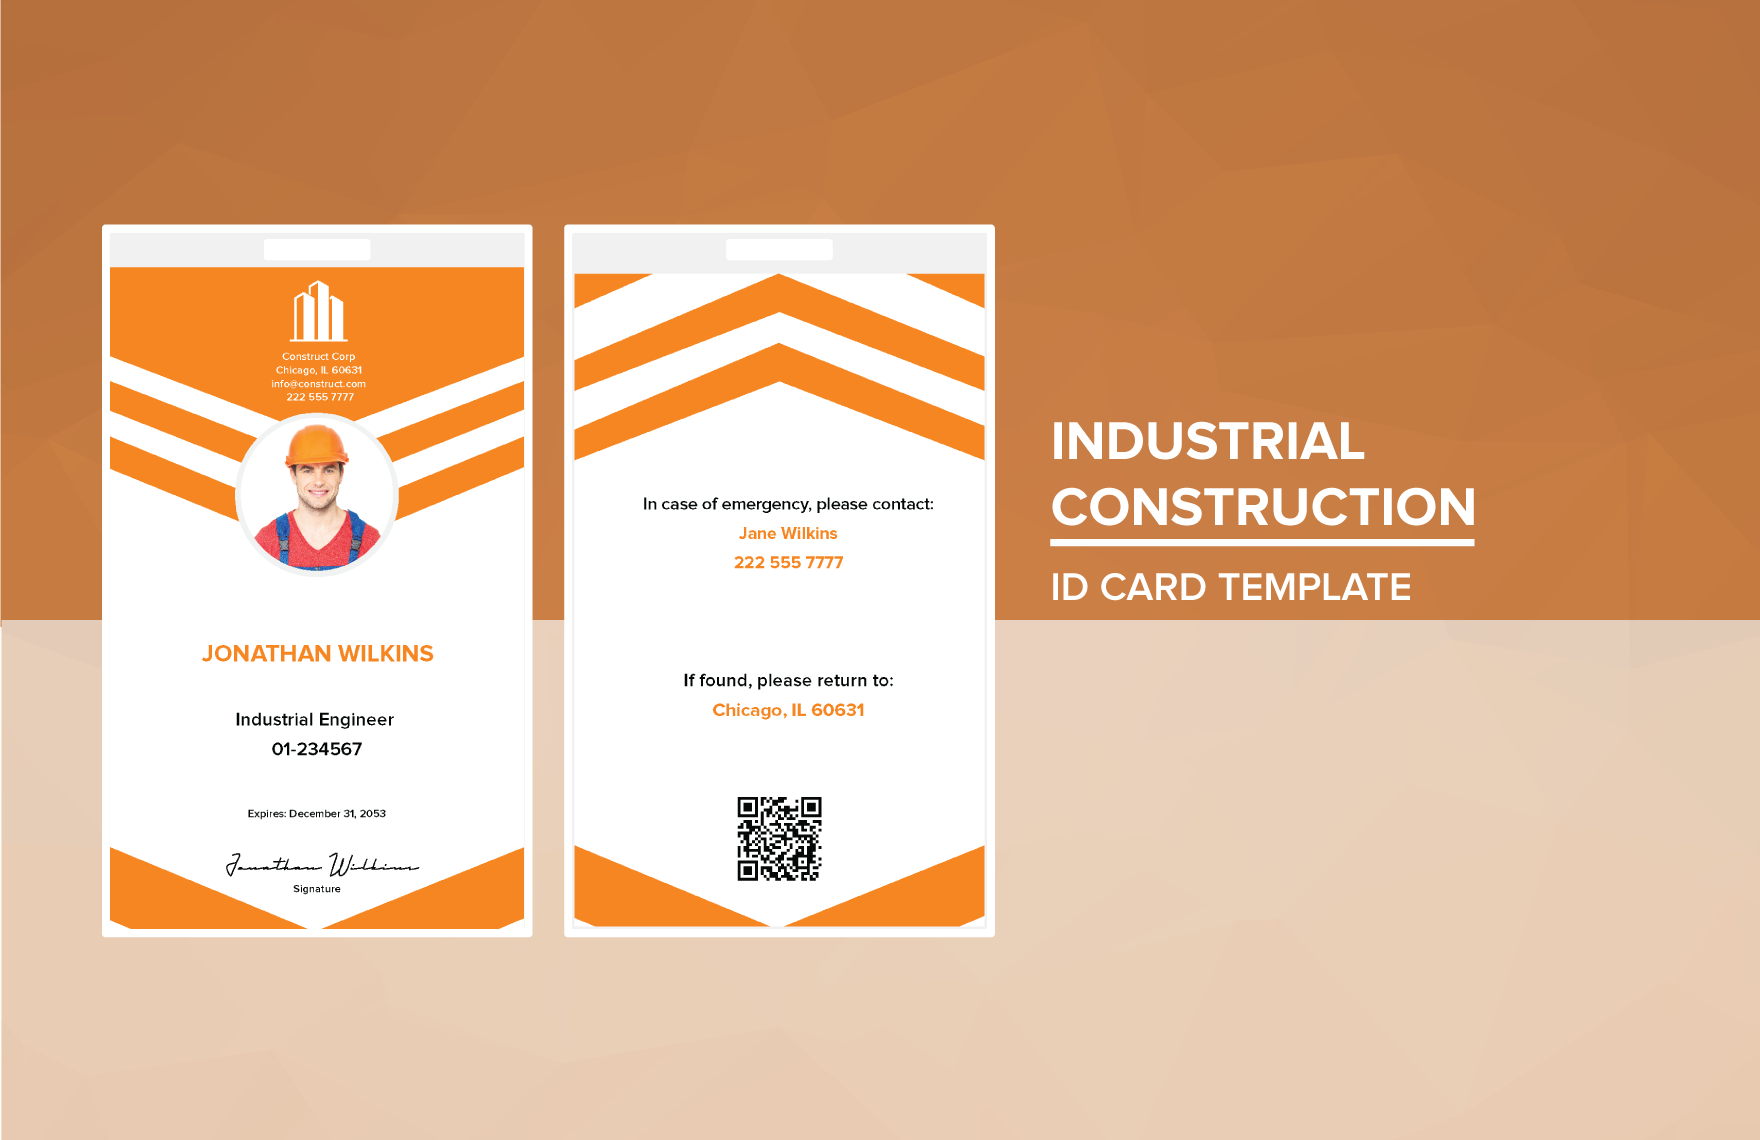 Industrial Construction ID Card